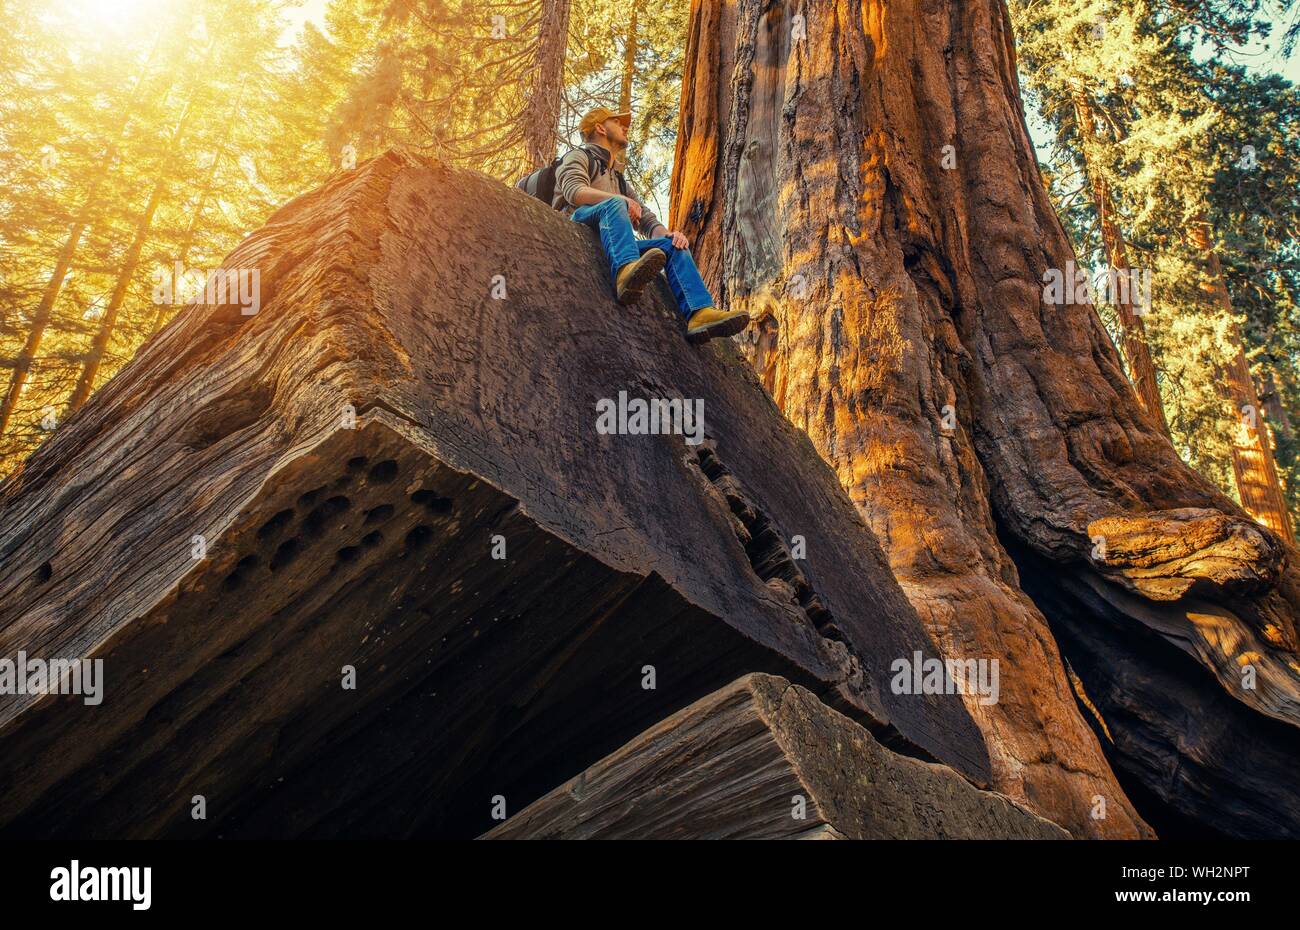 Low Angle View Of Man Sitting On Wood In Forest Stock Photo